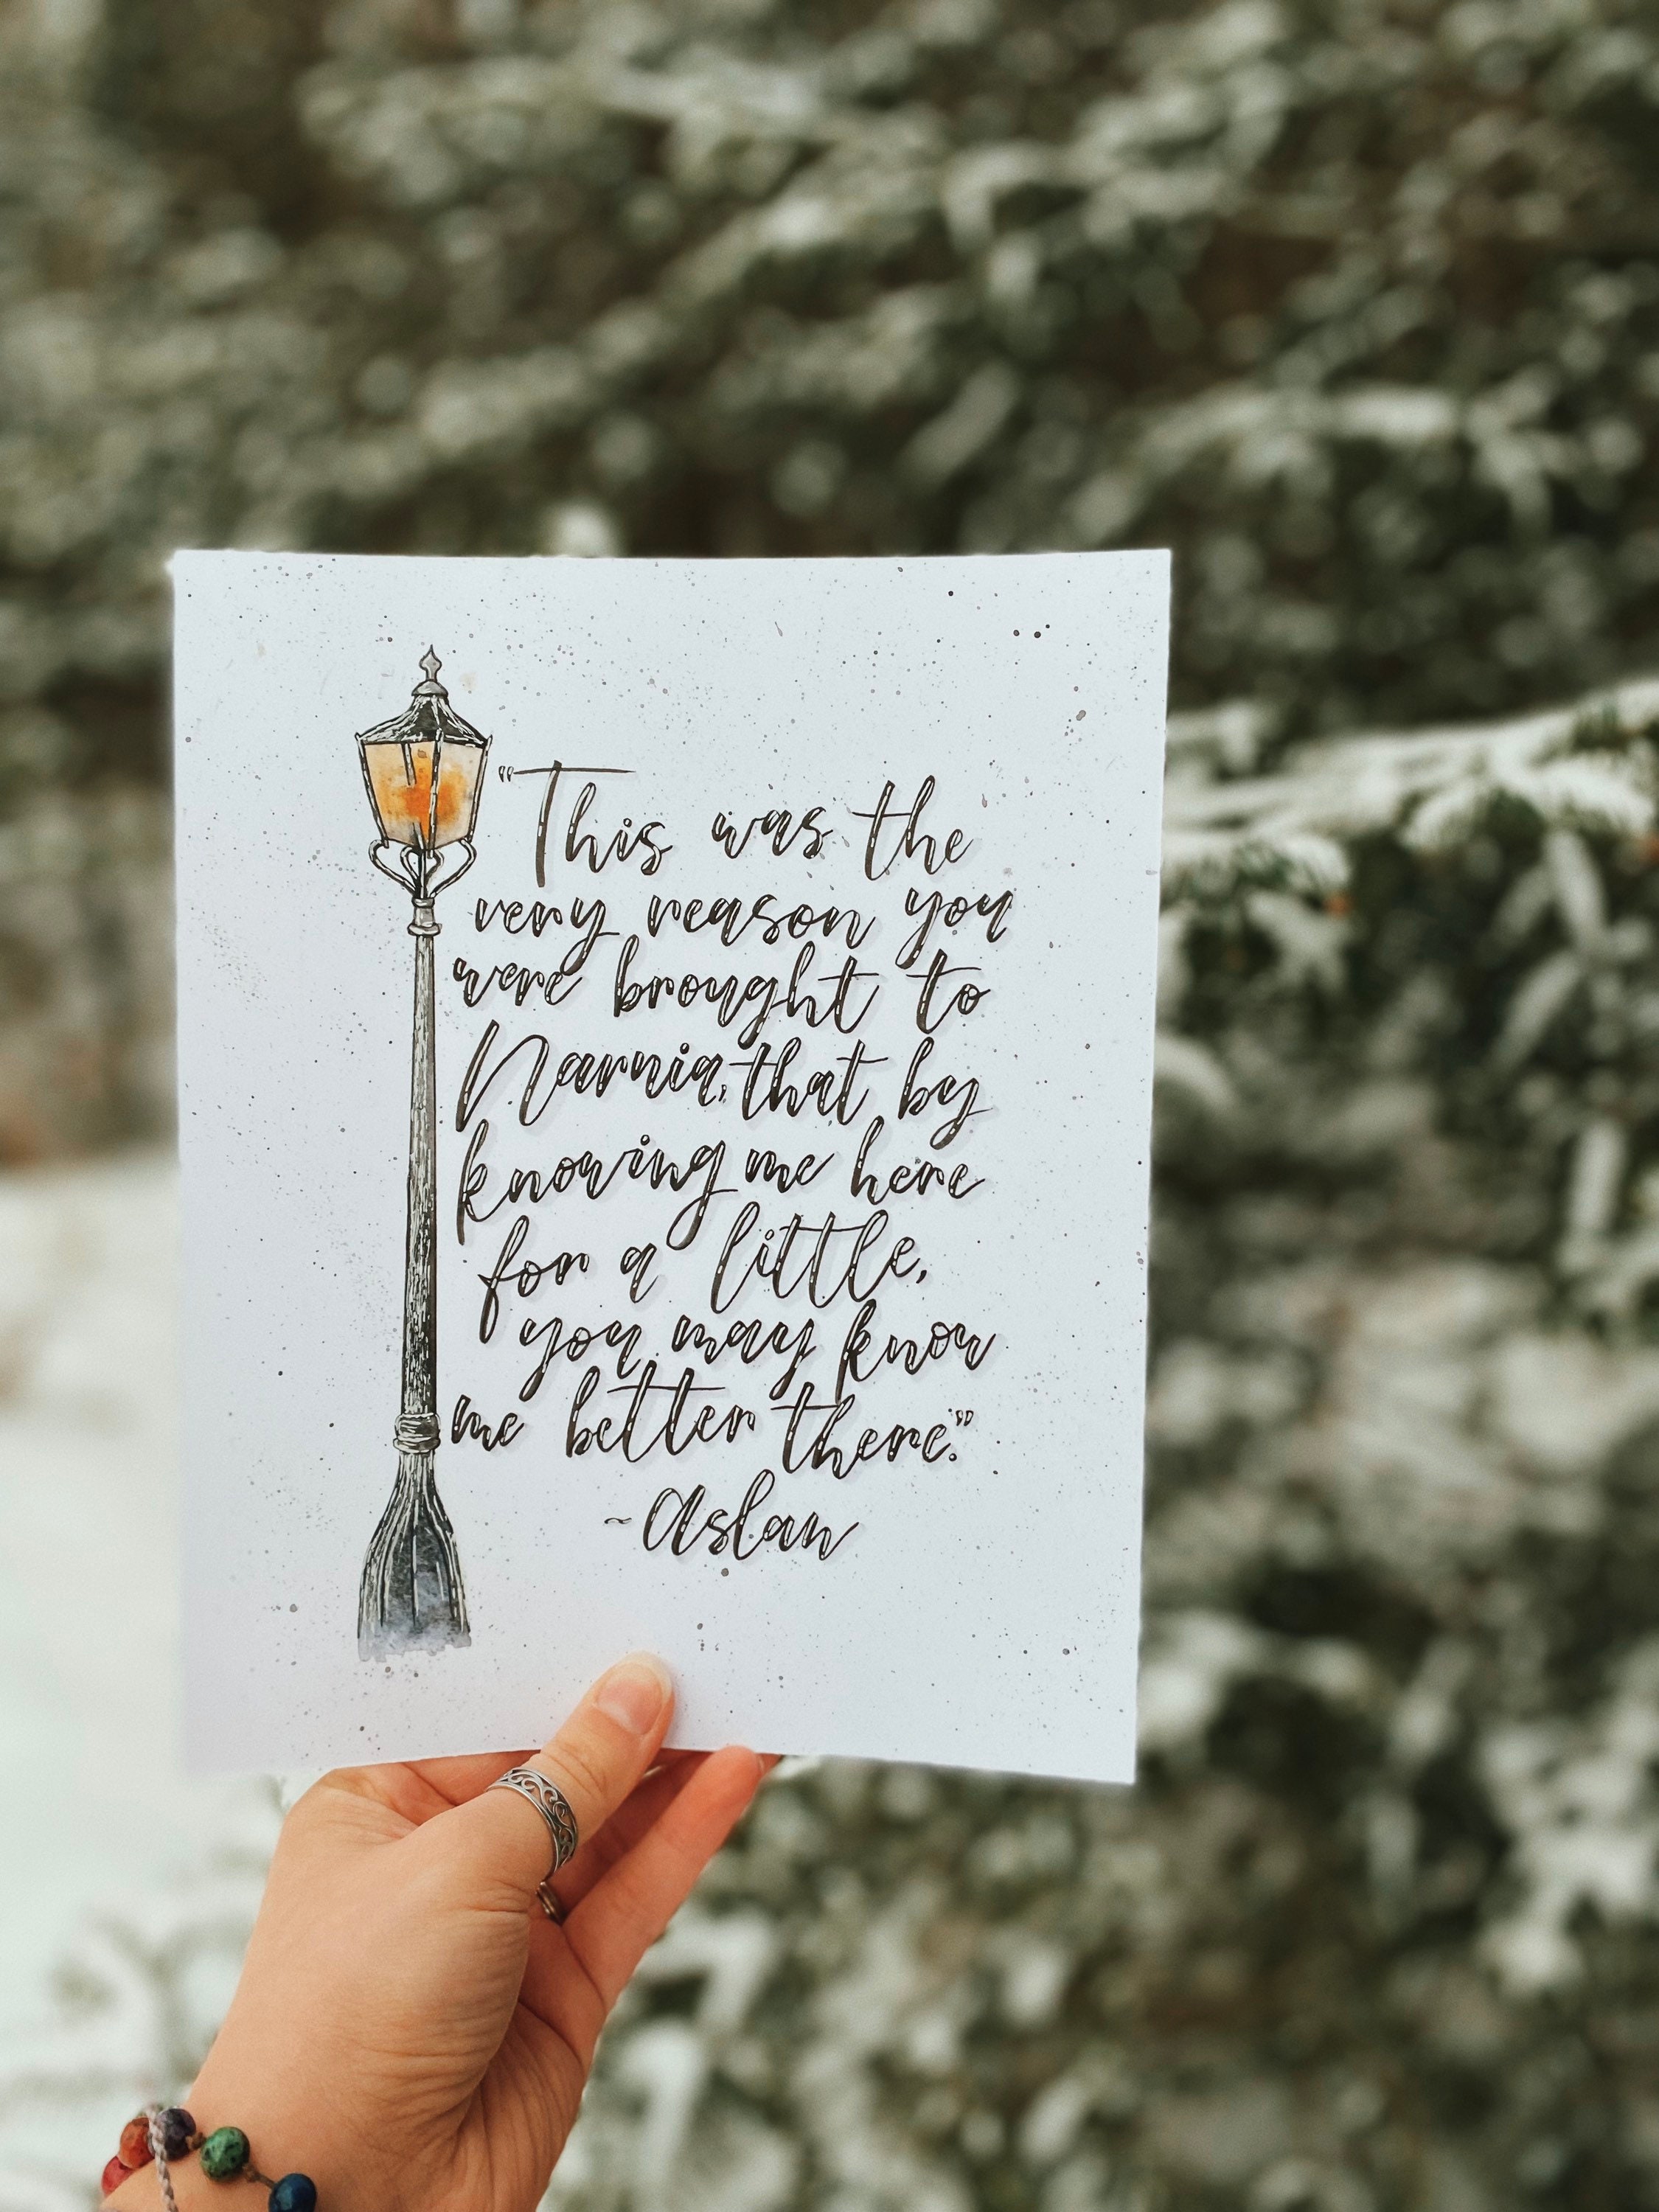 Aslan Quote // Narnia, CS Lewis Poster for Sale by CarolineTherese